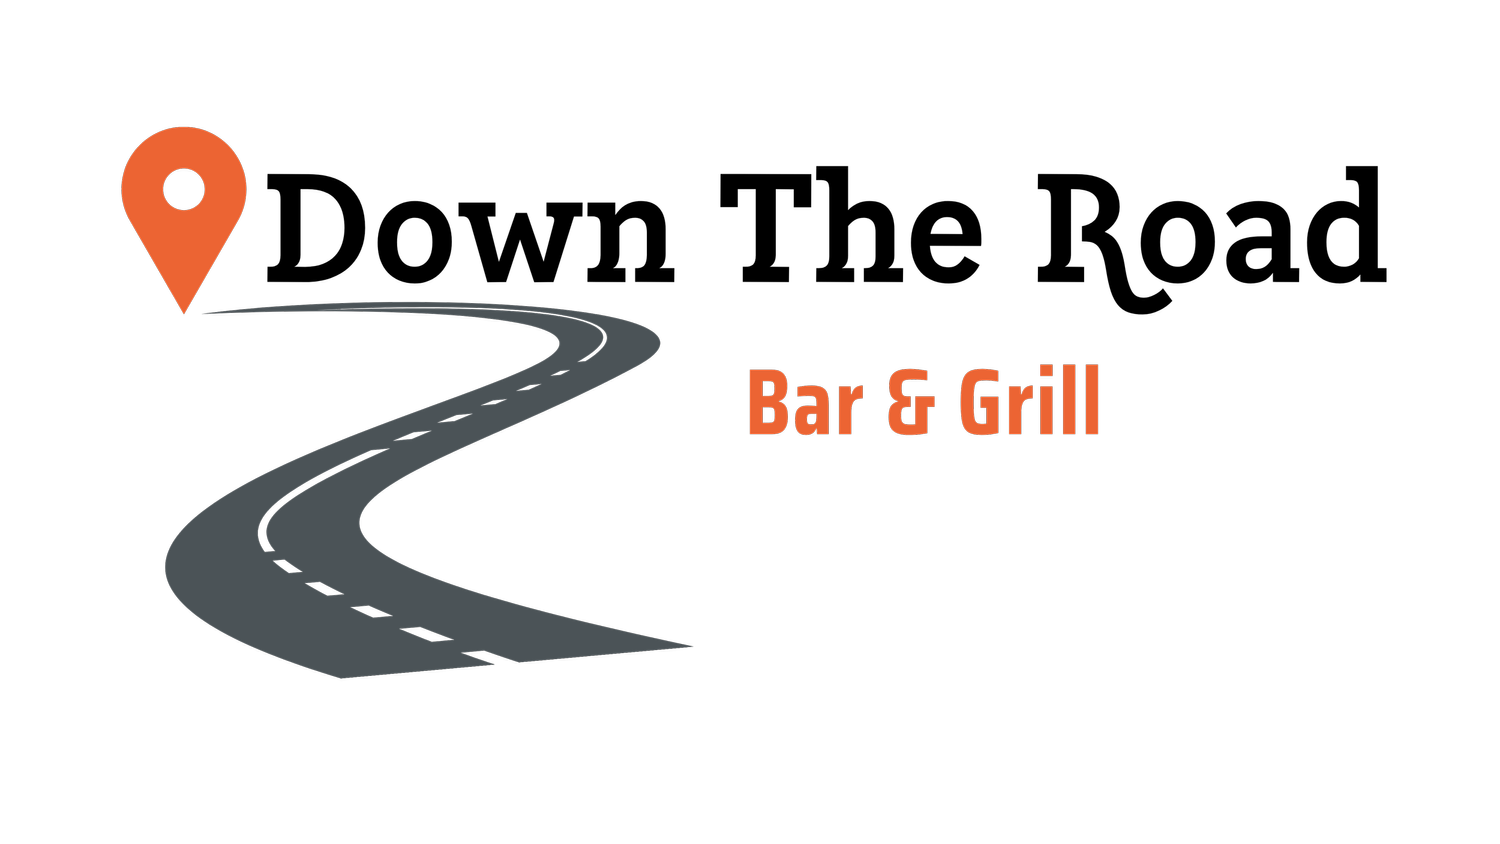 Down The Road Bar and Grill